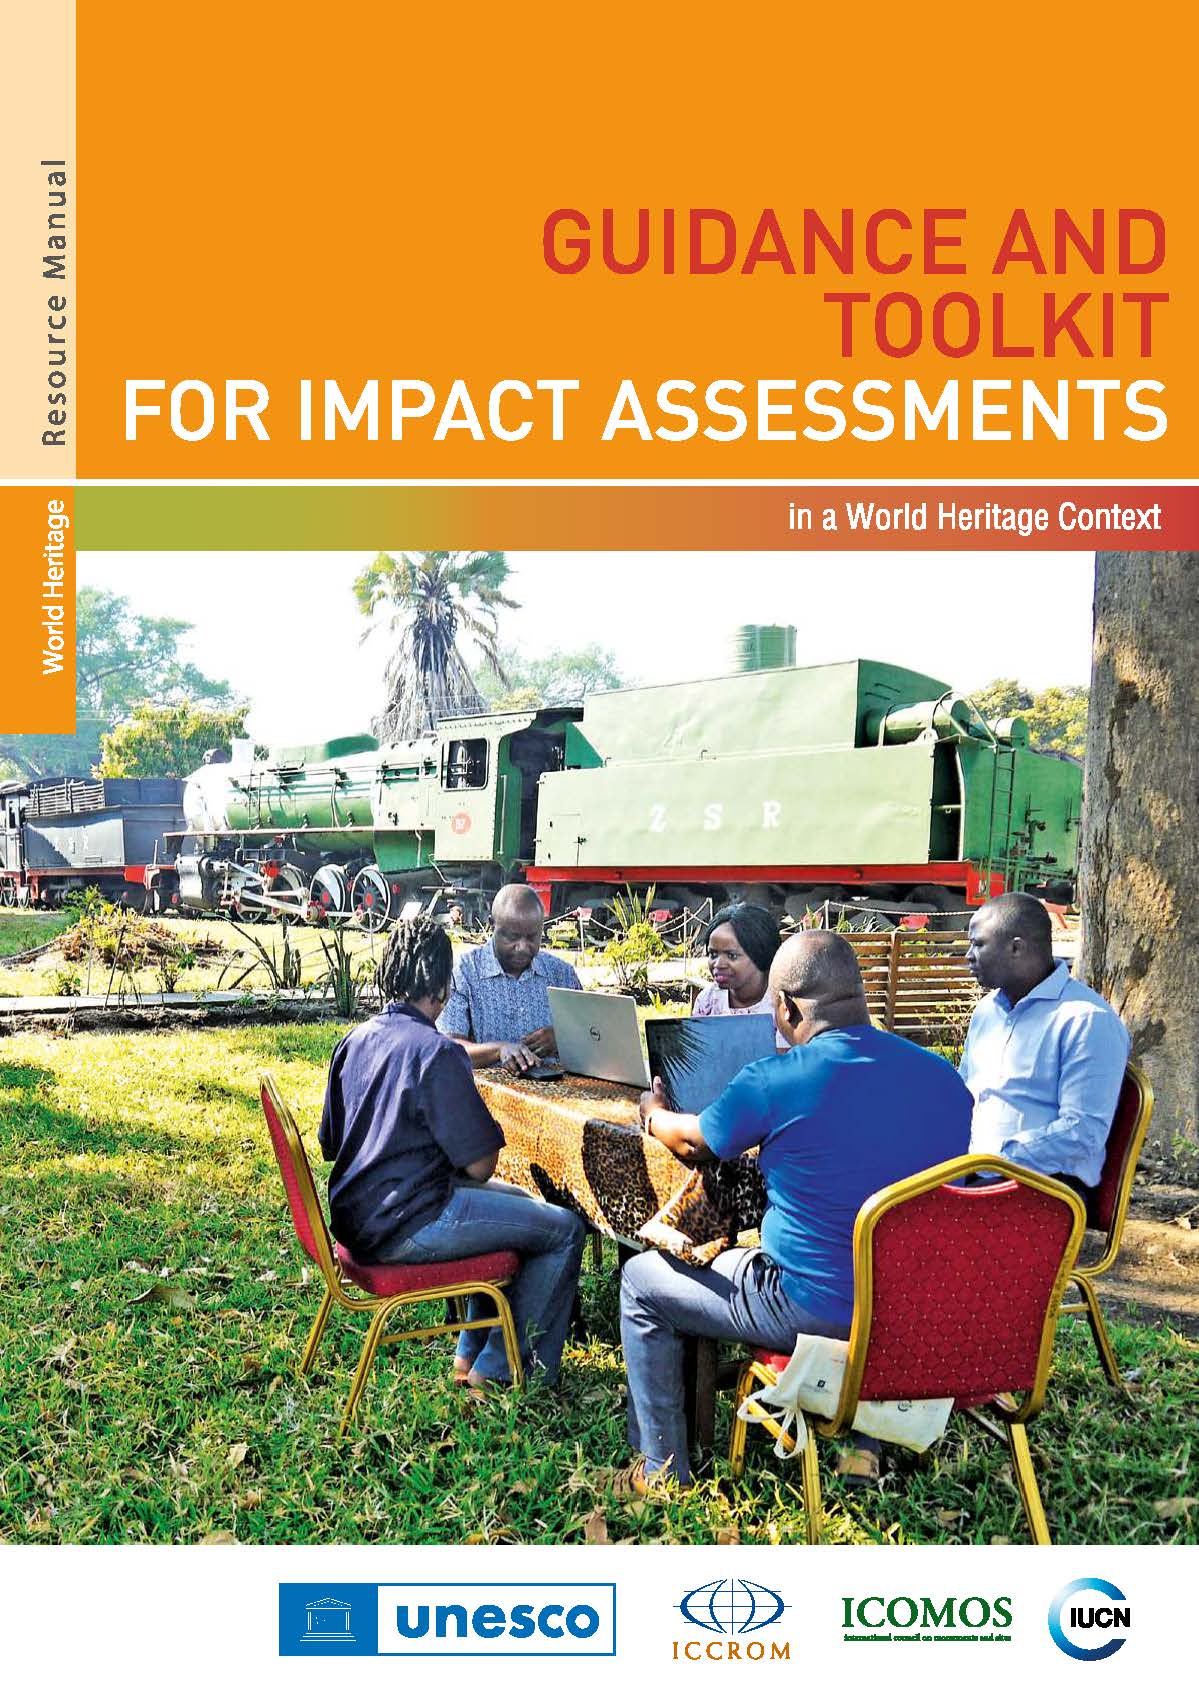 Guidance and Toolkit for Impact Assessment in a World Heritage Context